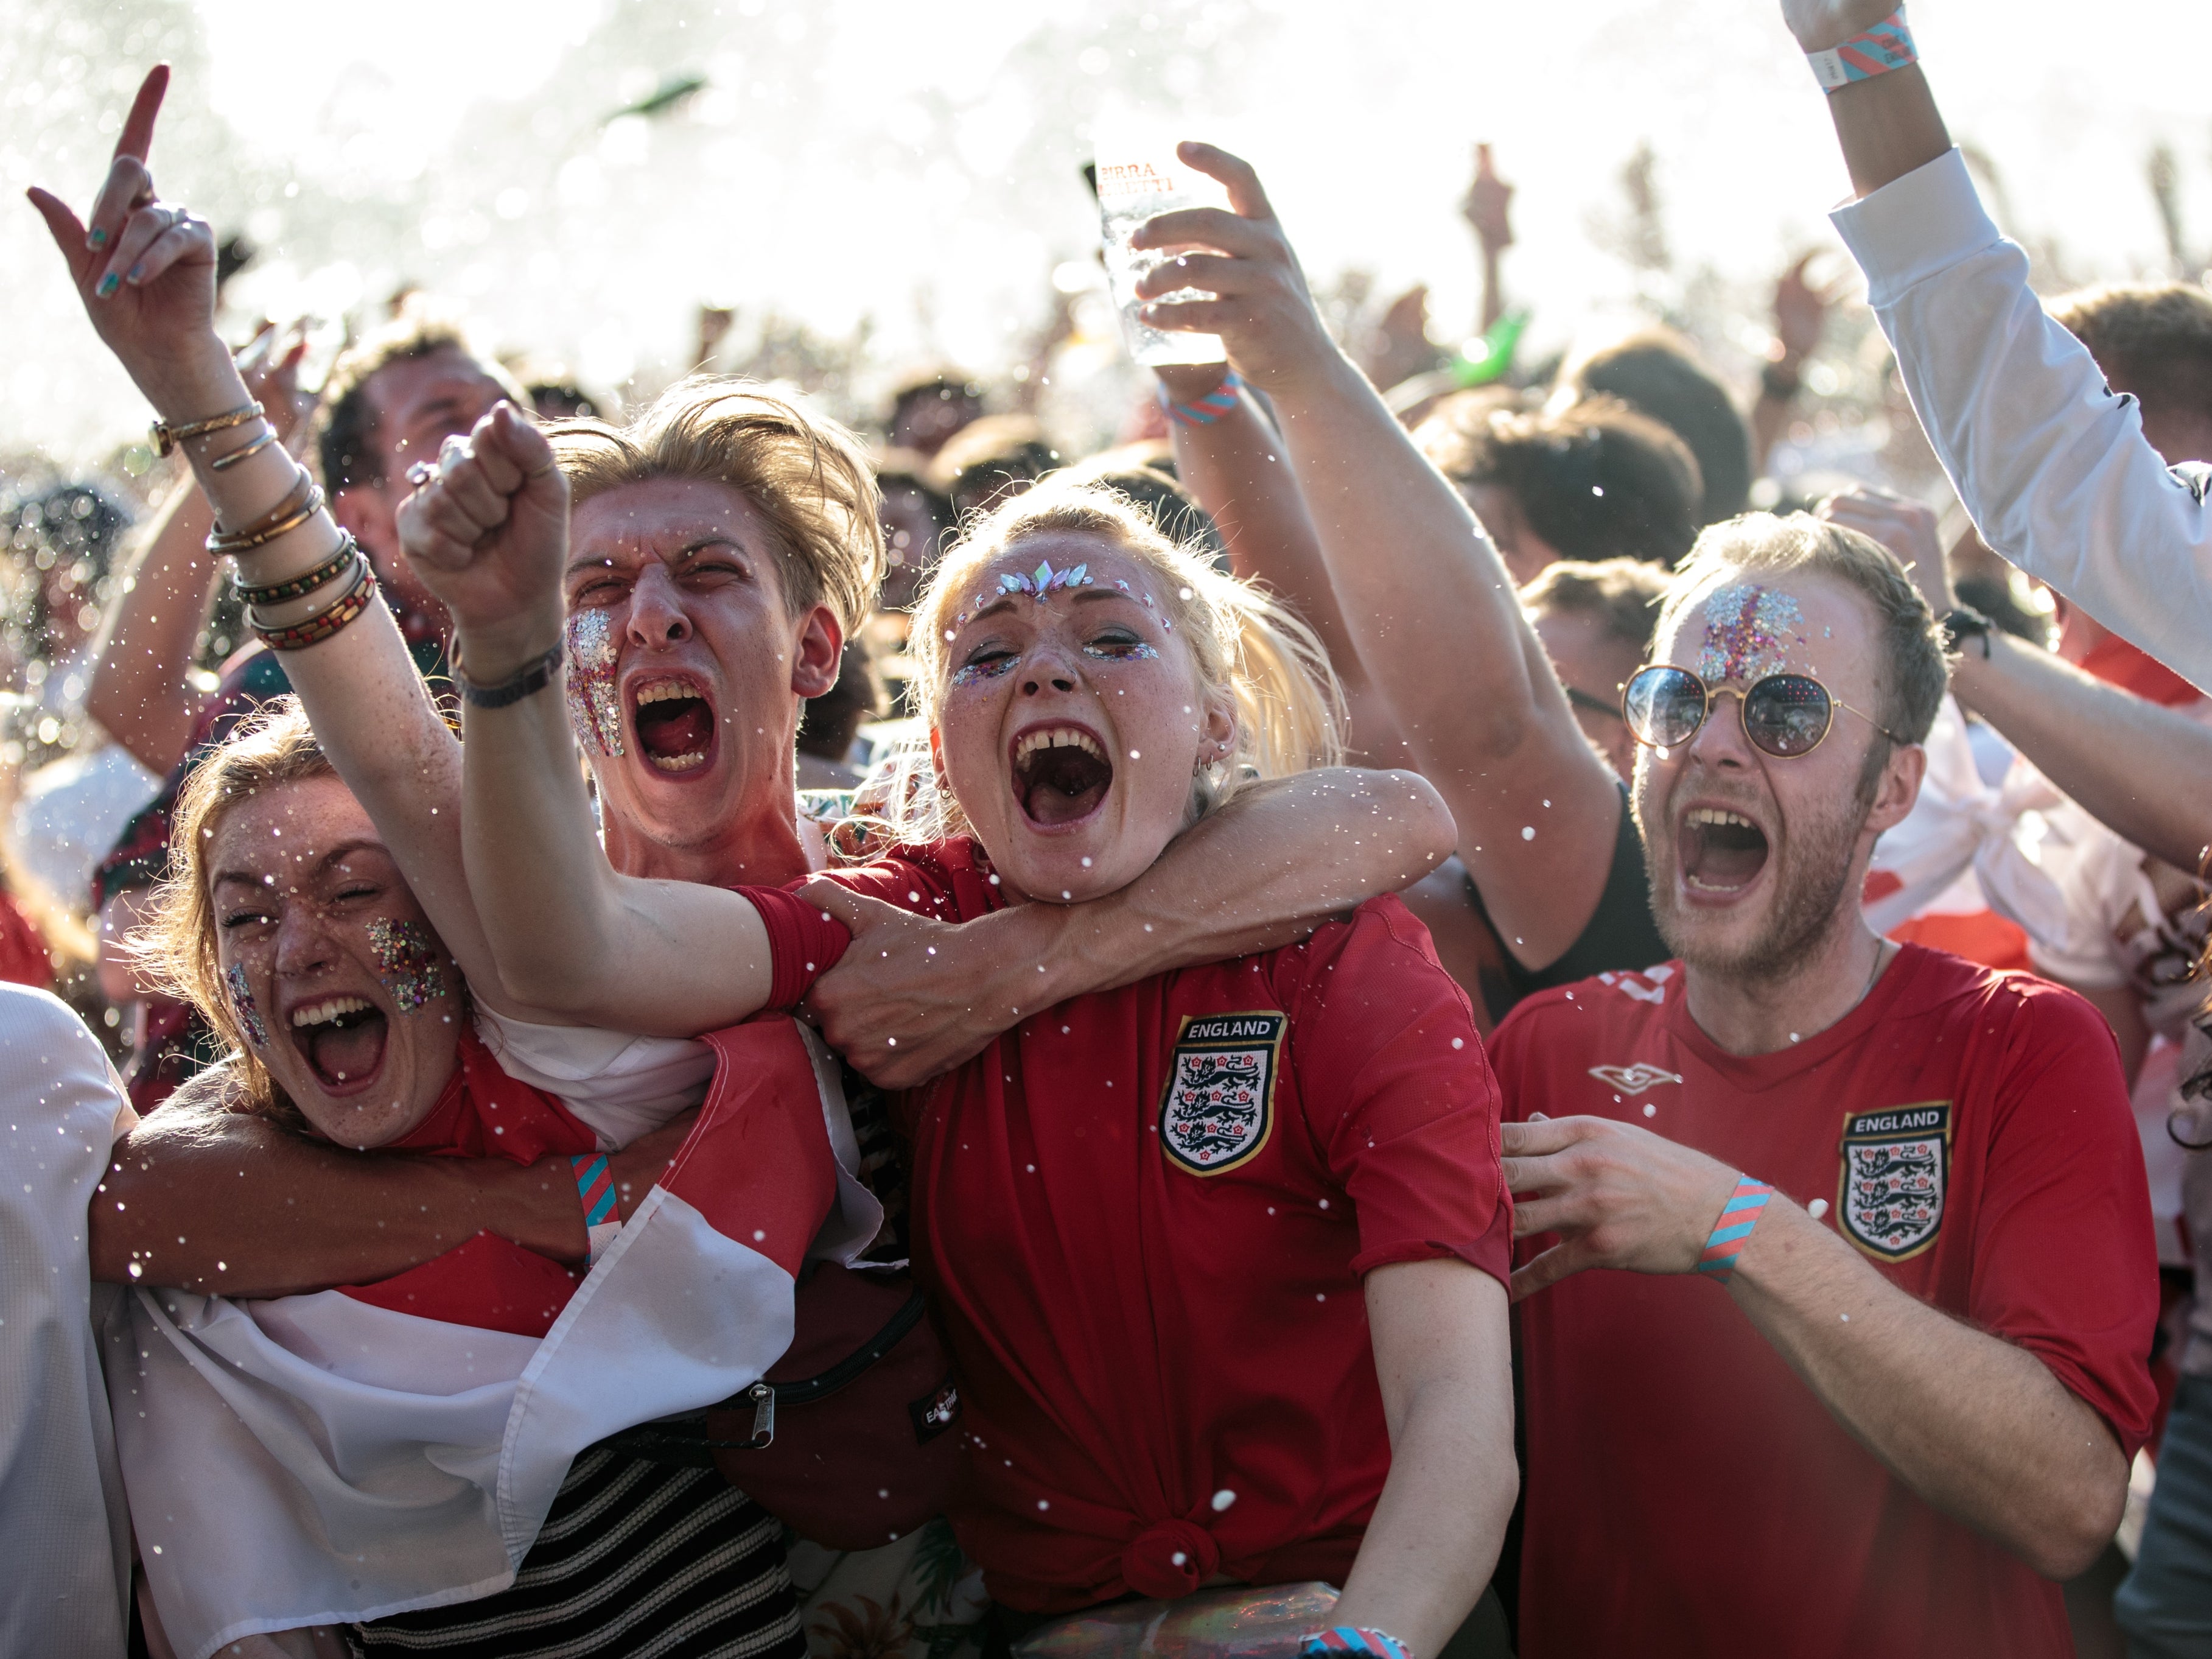 England’s run to the 2018 semi-finals gripped the entire country